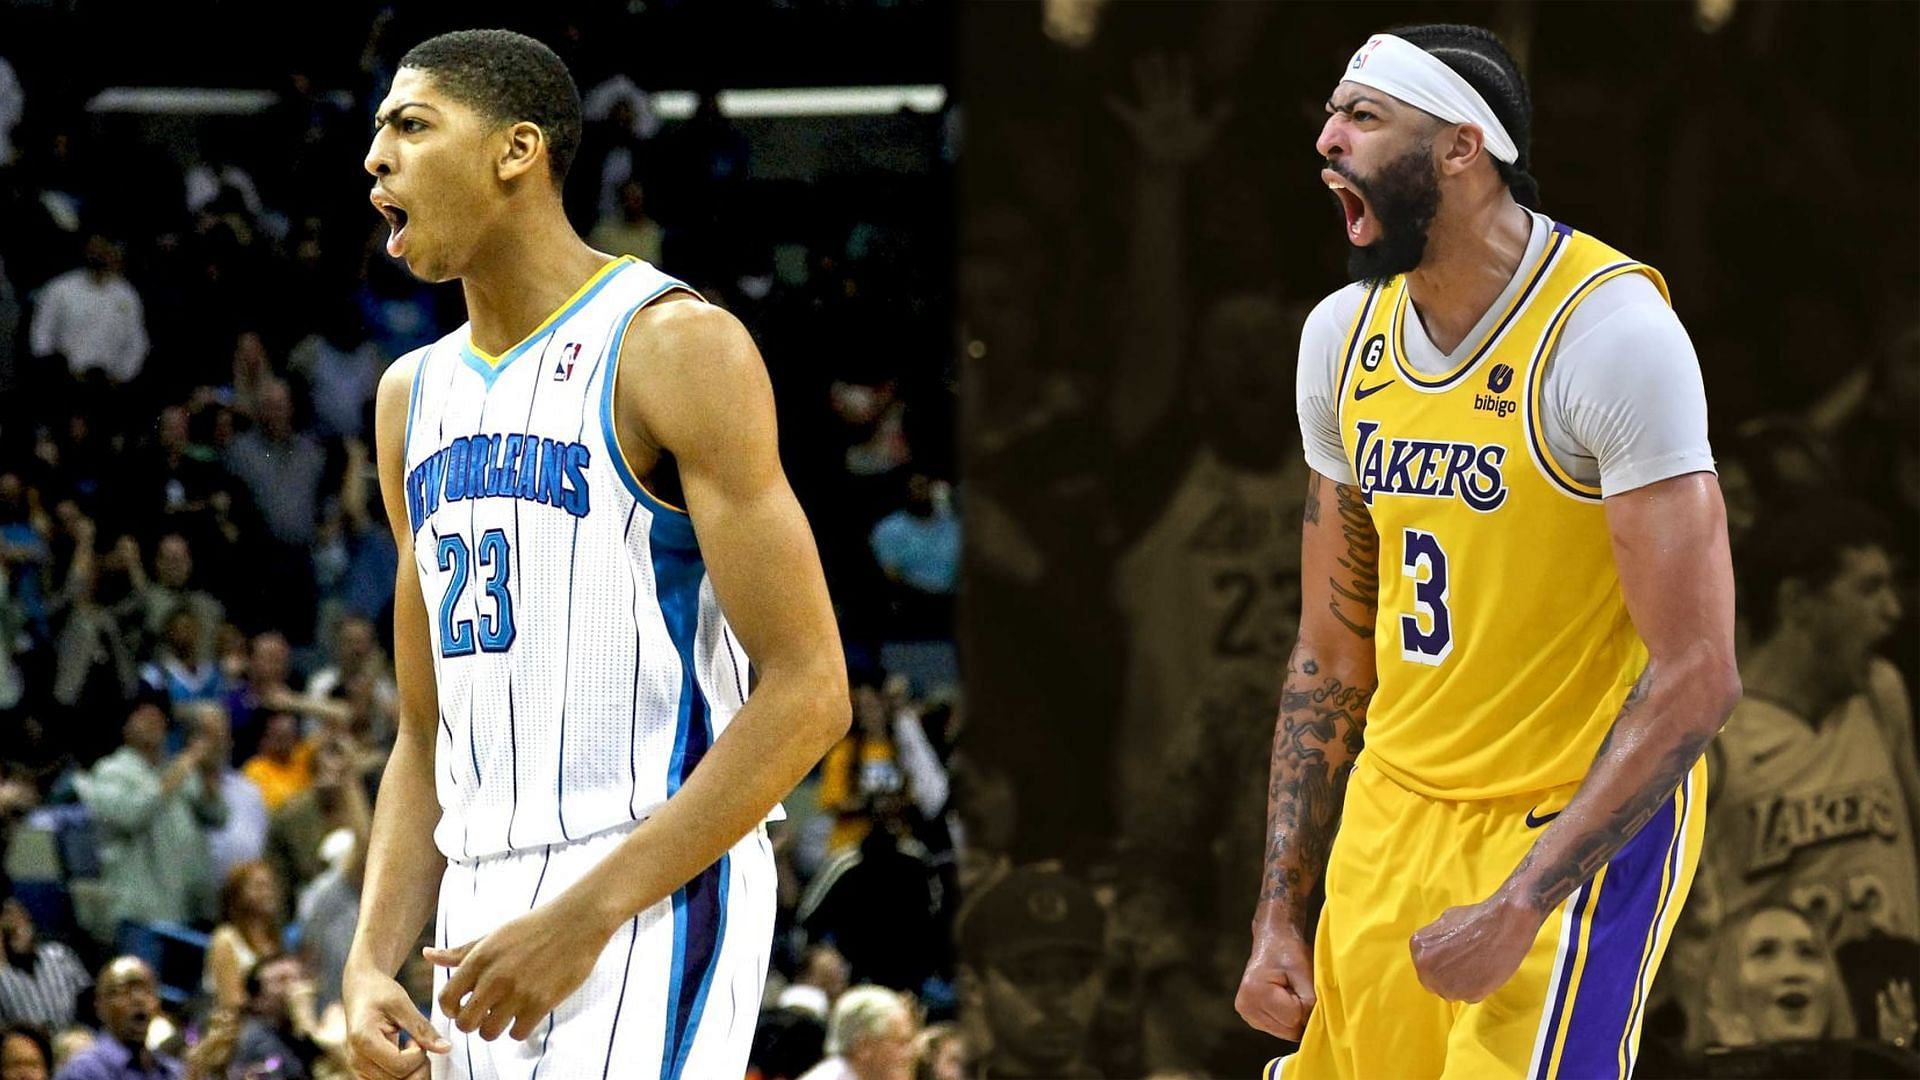 Anthony Davis was relatively skinny during his rookie season